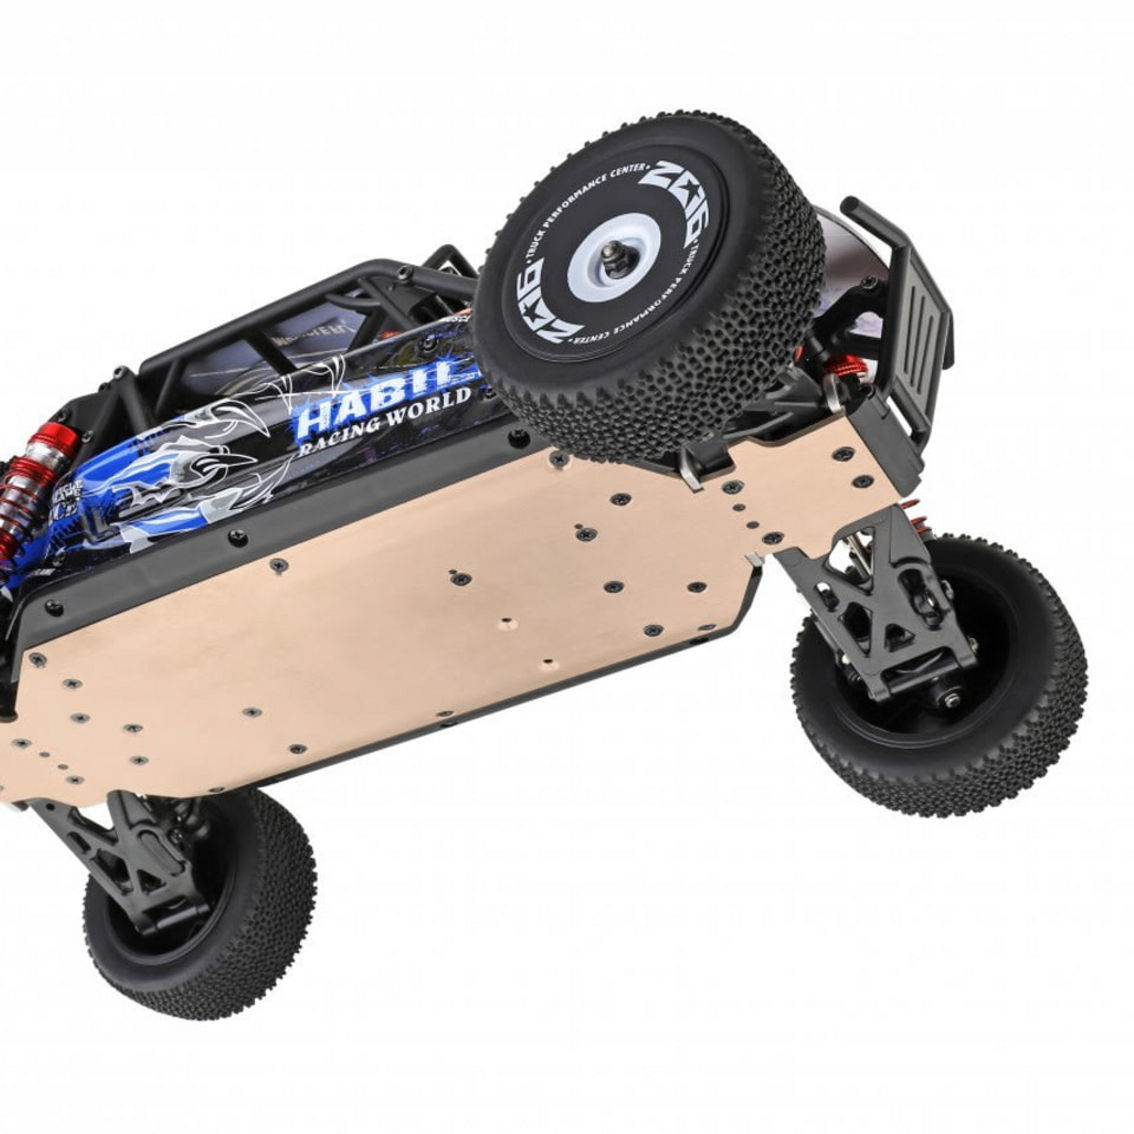 CIS-124018 1:12 scale monster truck 4WD - Image 4 of 5